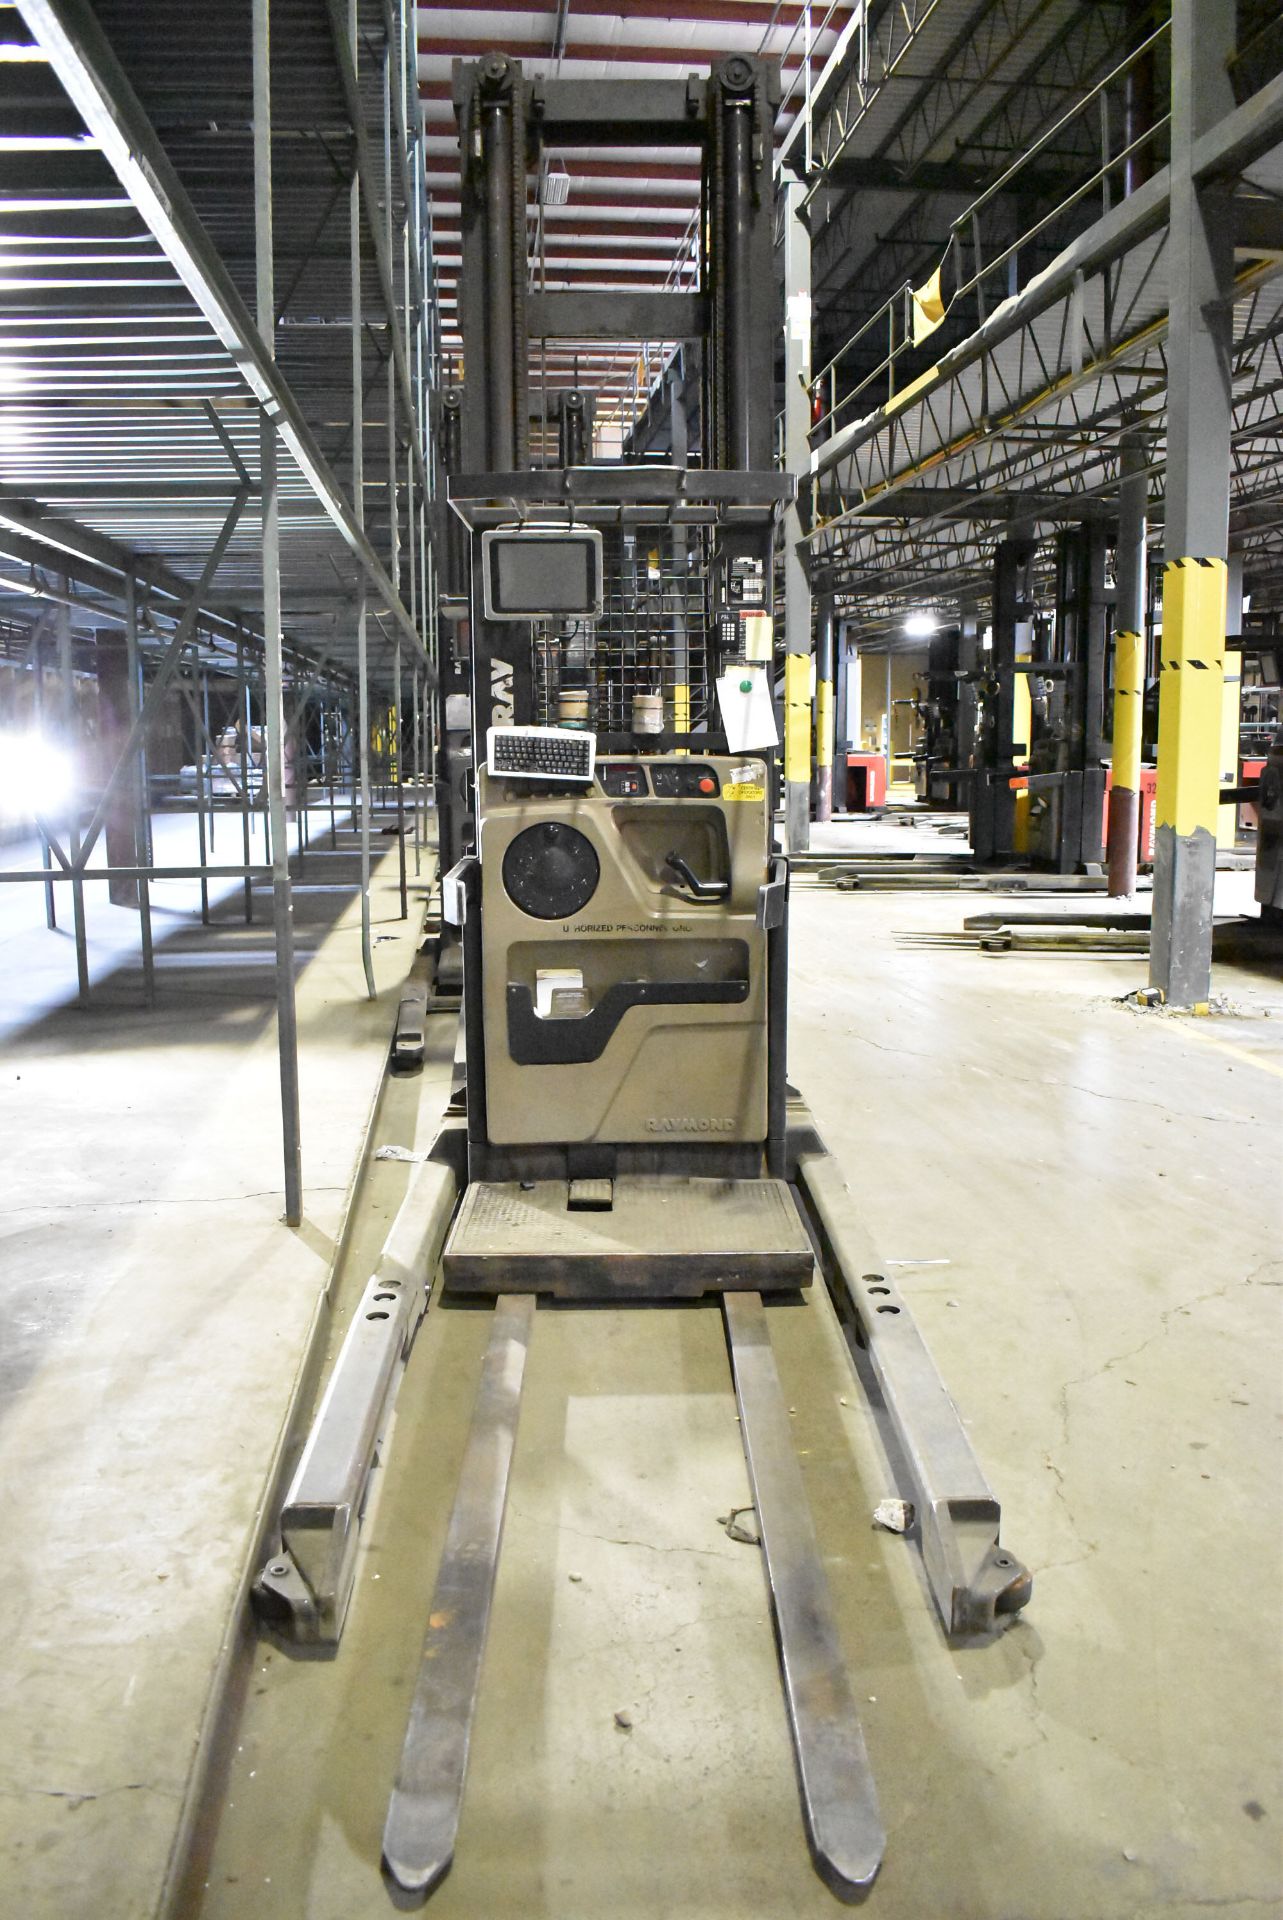 RAYMOND EASI-OPC30TT 1,600 LB. CAPACITY 24V ELECTRIC ORDER PICKER WITH 330" MAX. LIFT HEIGHT, 3- - Image 3 of 9